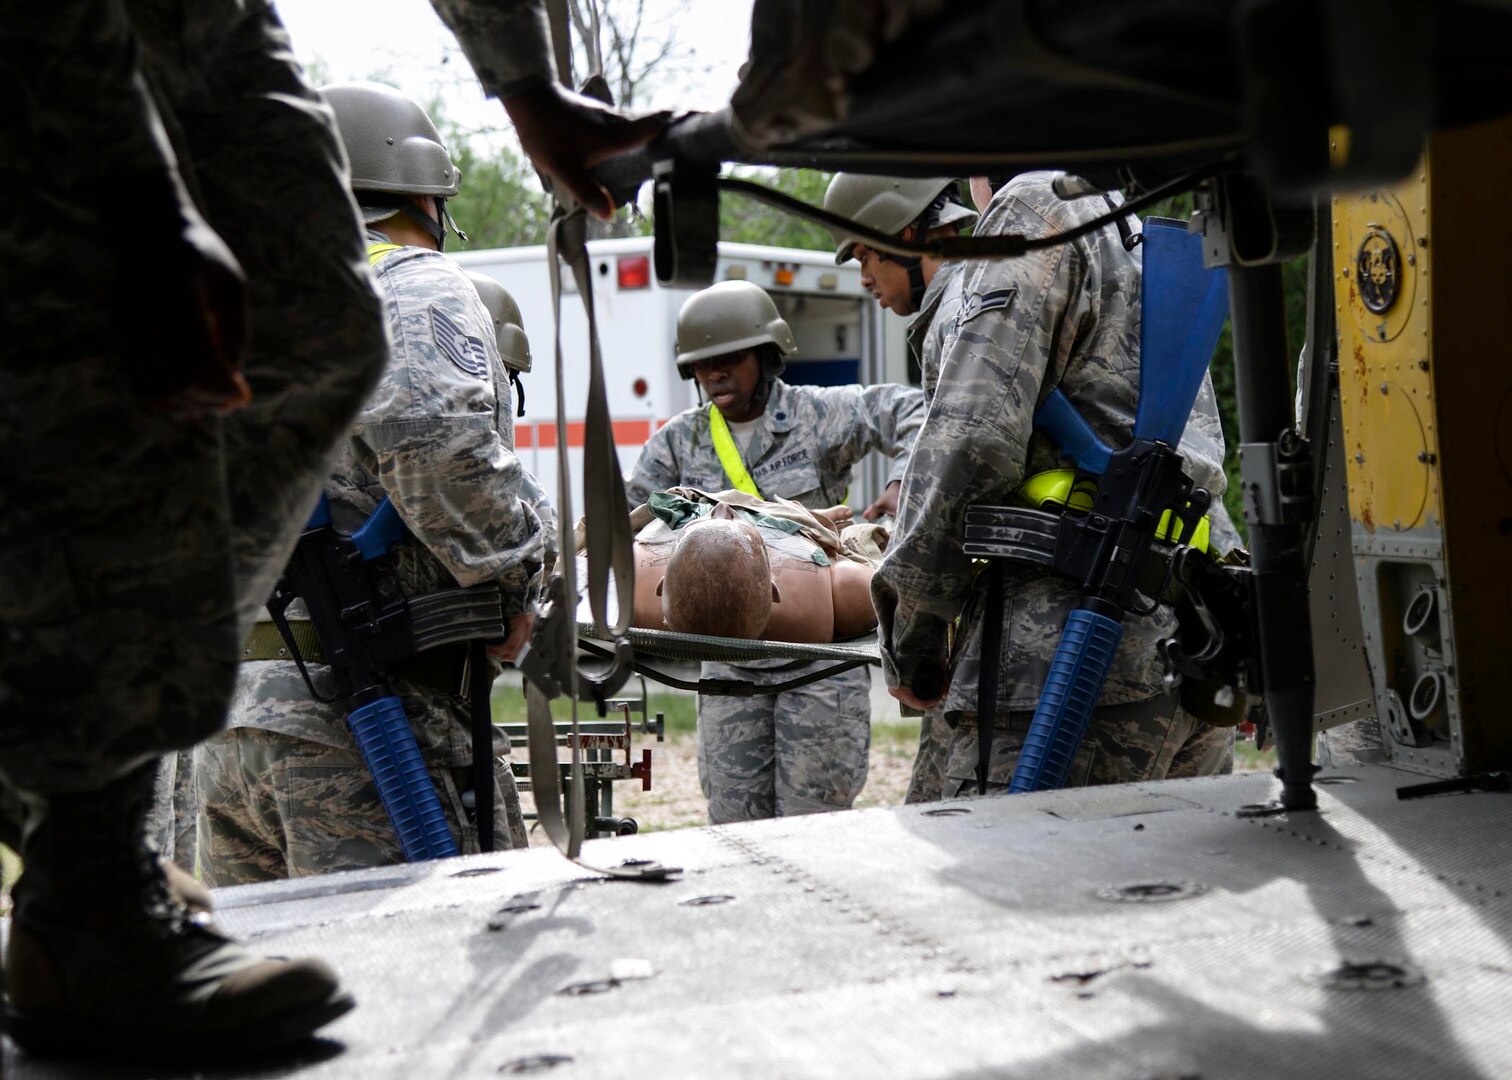 Airmen from the 59th Medical Wing transport mannequins, which simulate injured patients, during a two-day deployment readiness training exercise July 25 at Joint Base San Antonio-Lackland, Texas. The training is required every two years, or prior to a deployment. (U.S. Air Force photo/Staff Sgt. Kevin Iinuma)